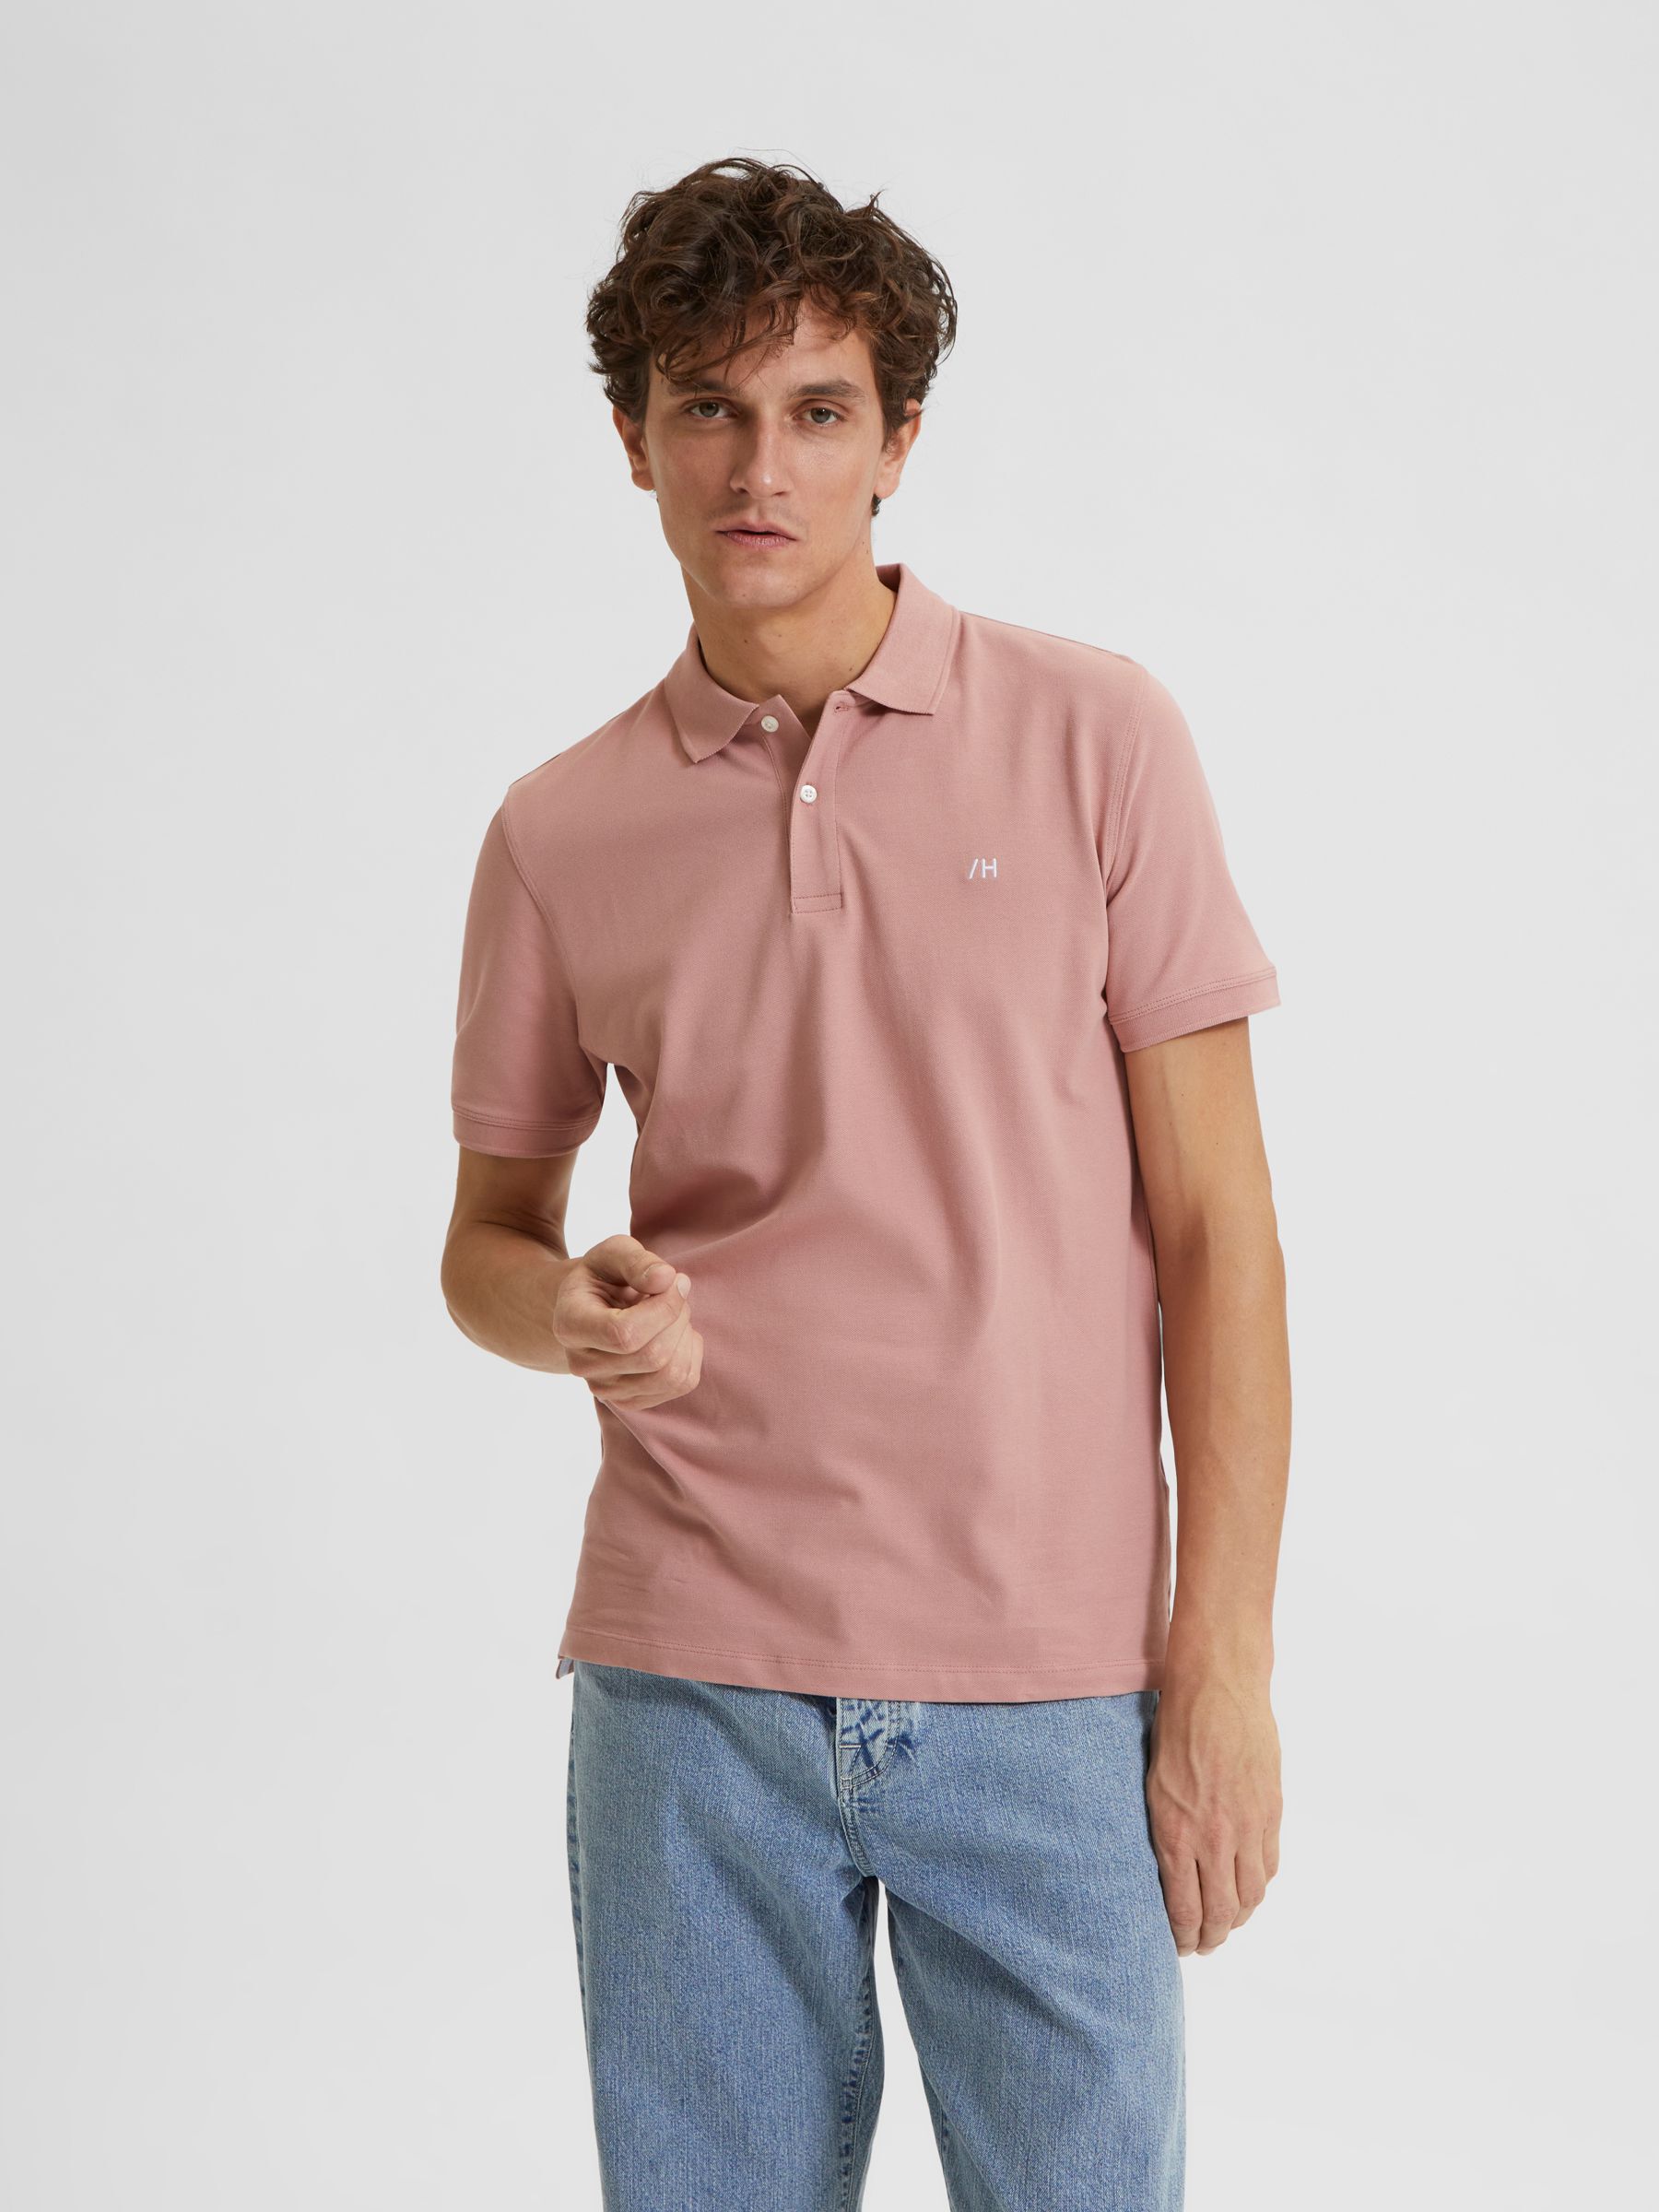 Short Sleeve Polo Shirts For Men | SELECTED HOMME